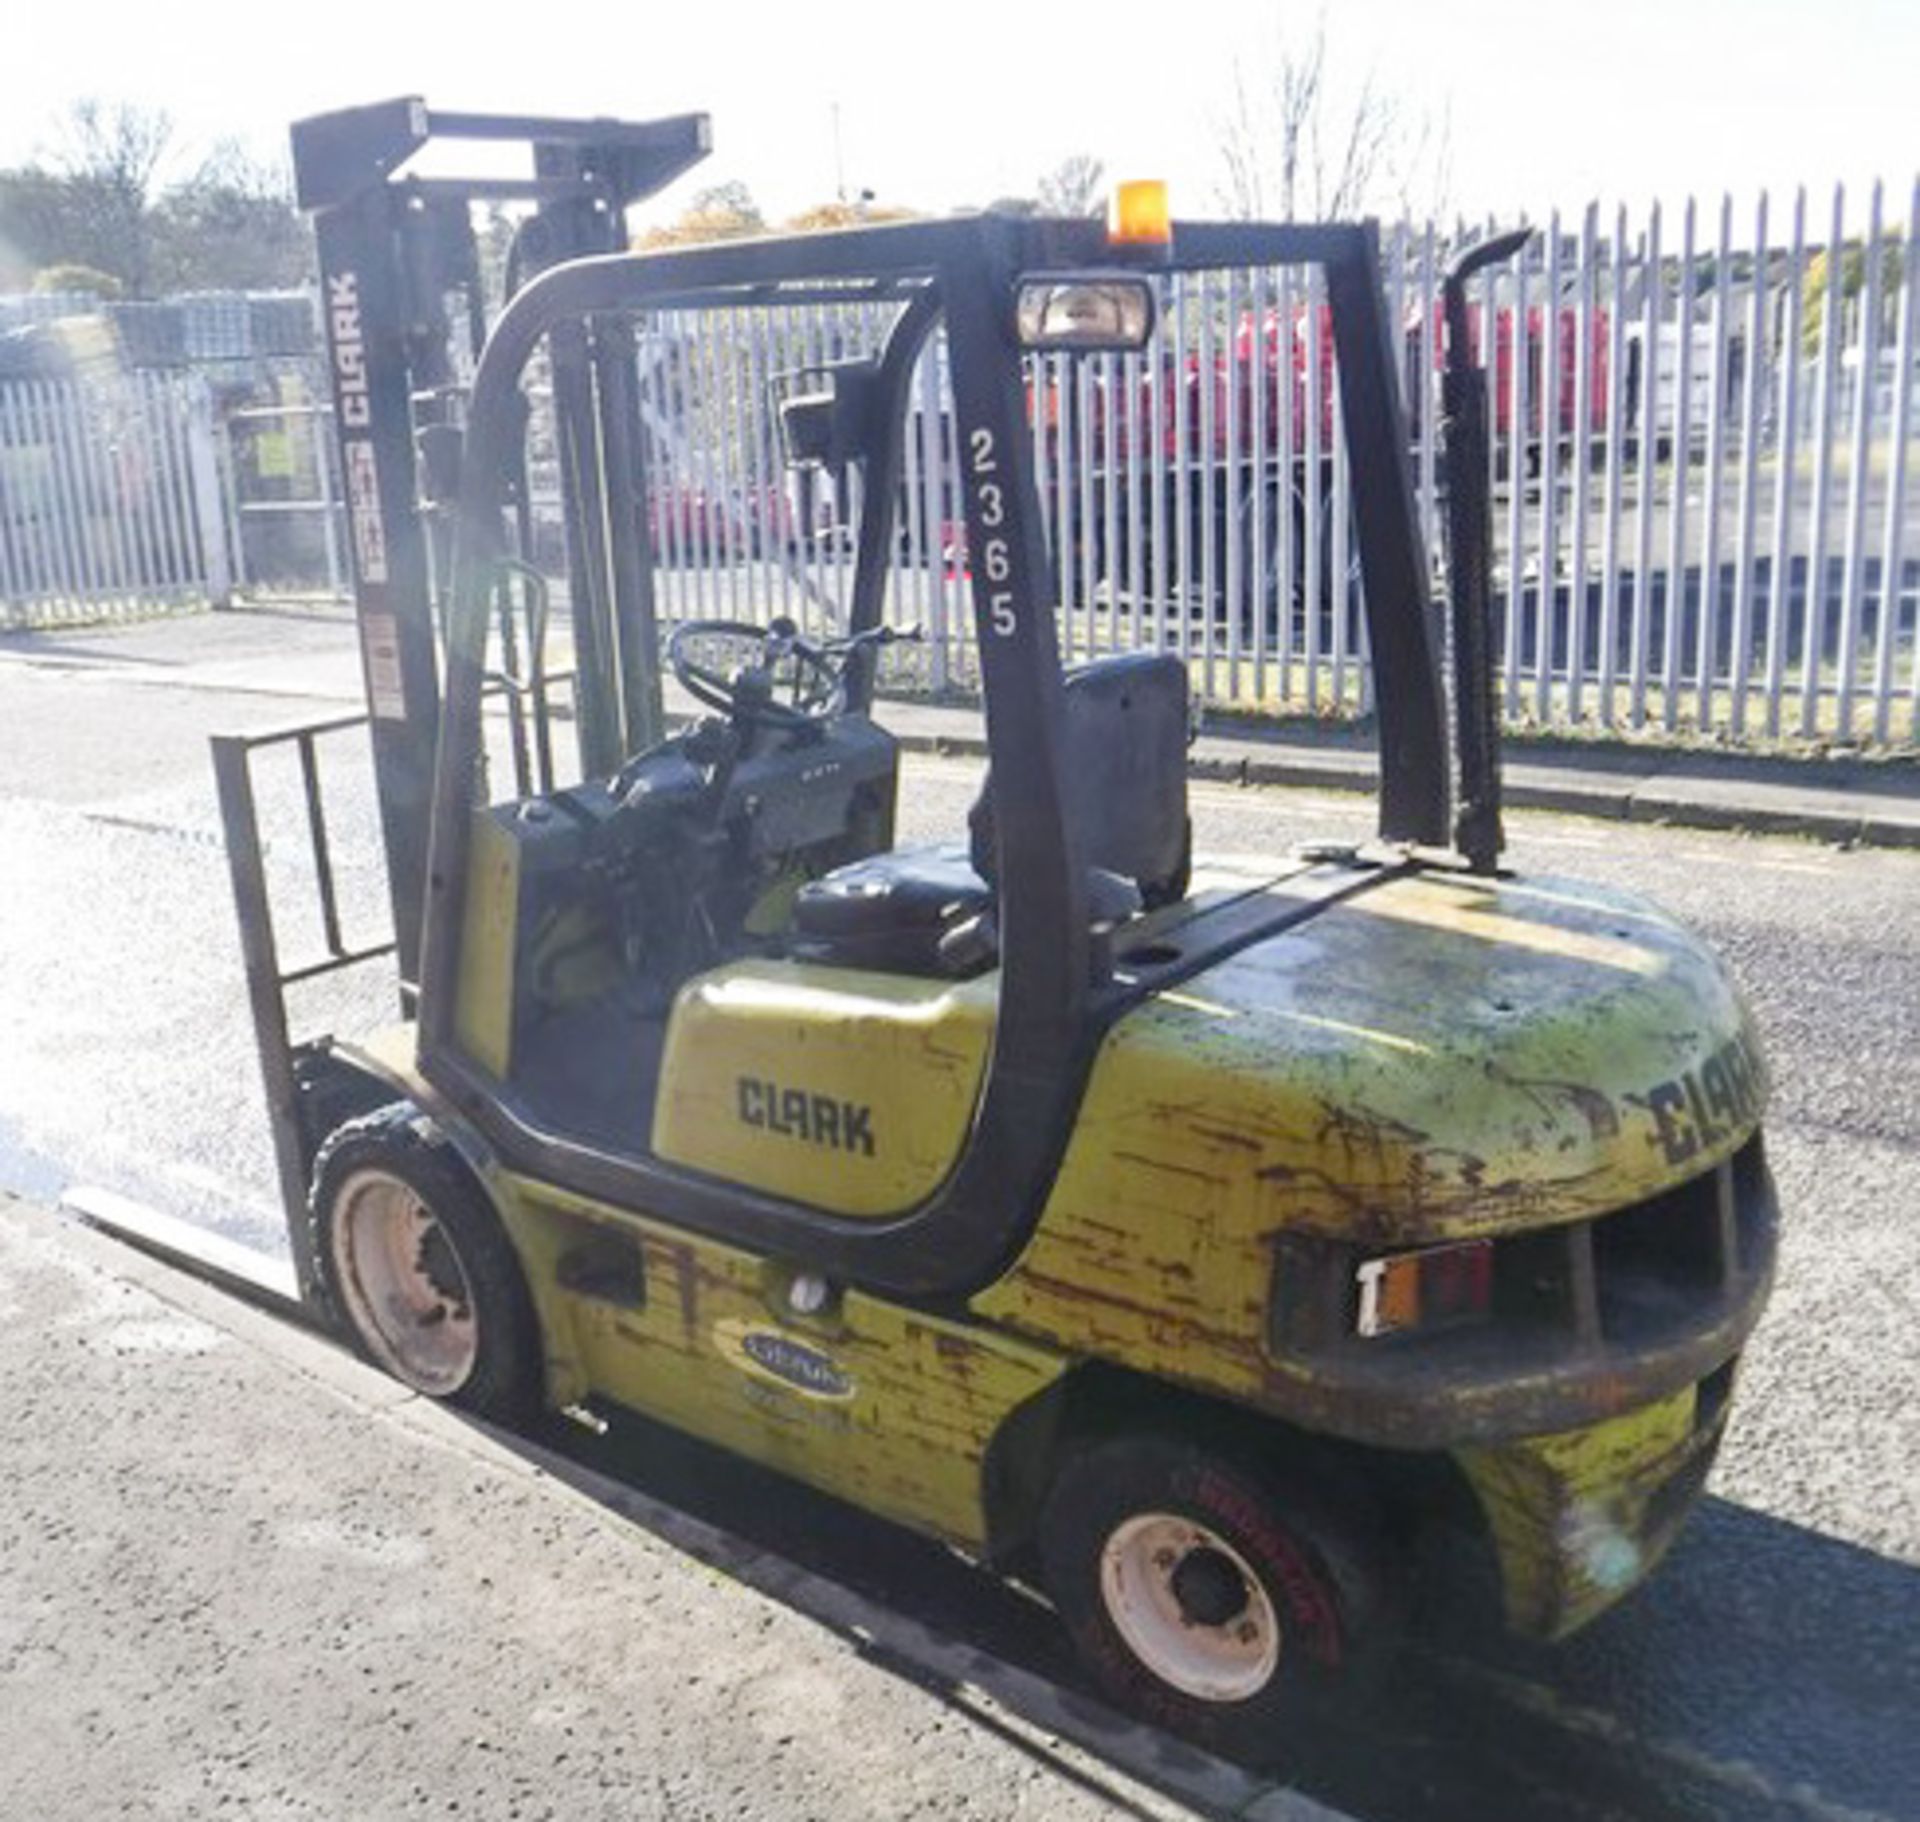 CLARKE 3 TON DIESEL FORKLIFT WITH SIDE SHIFT 7832HRS (NOT VERIFIED) - Image 12 of 16